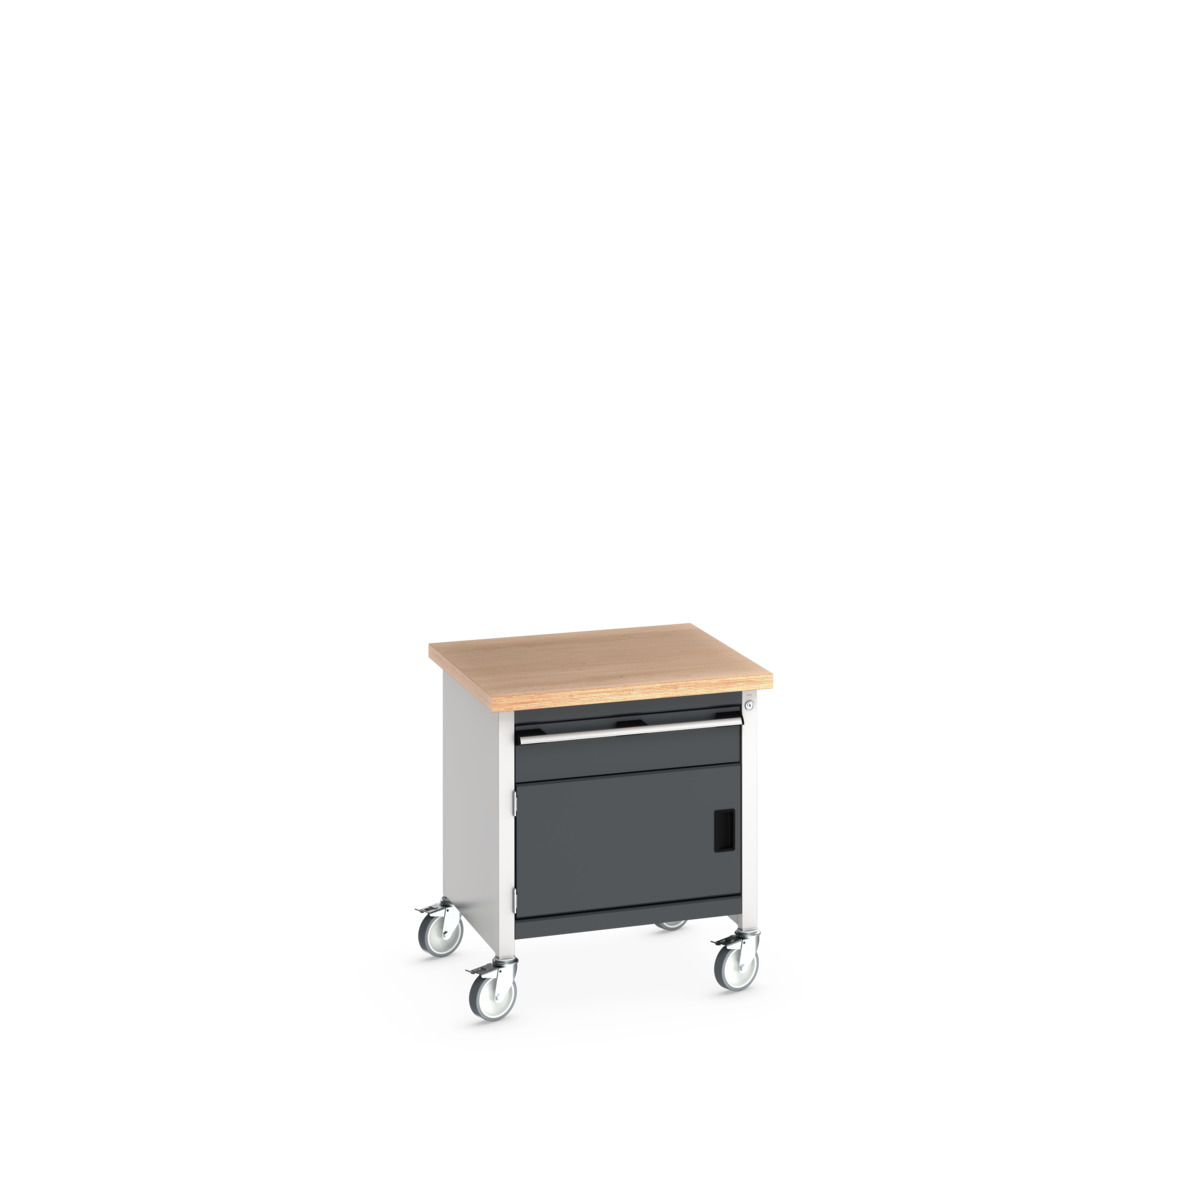 41002088.19V - cubio mobile storage bench (mpx)